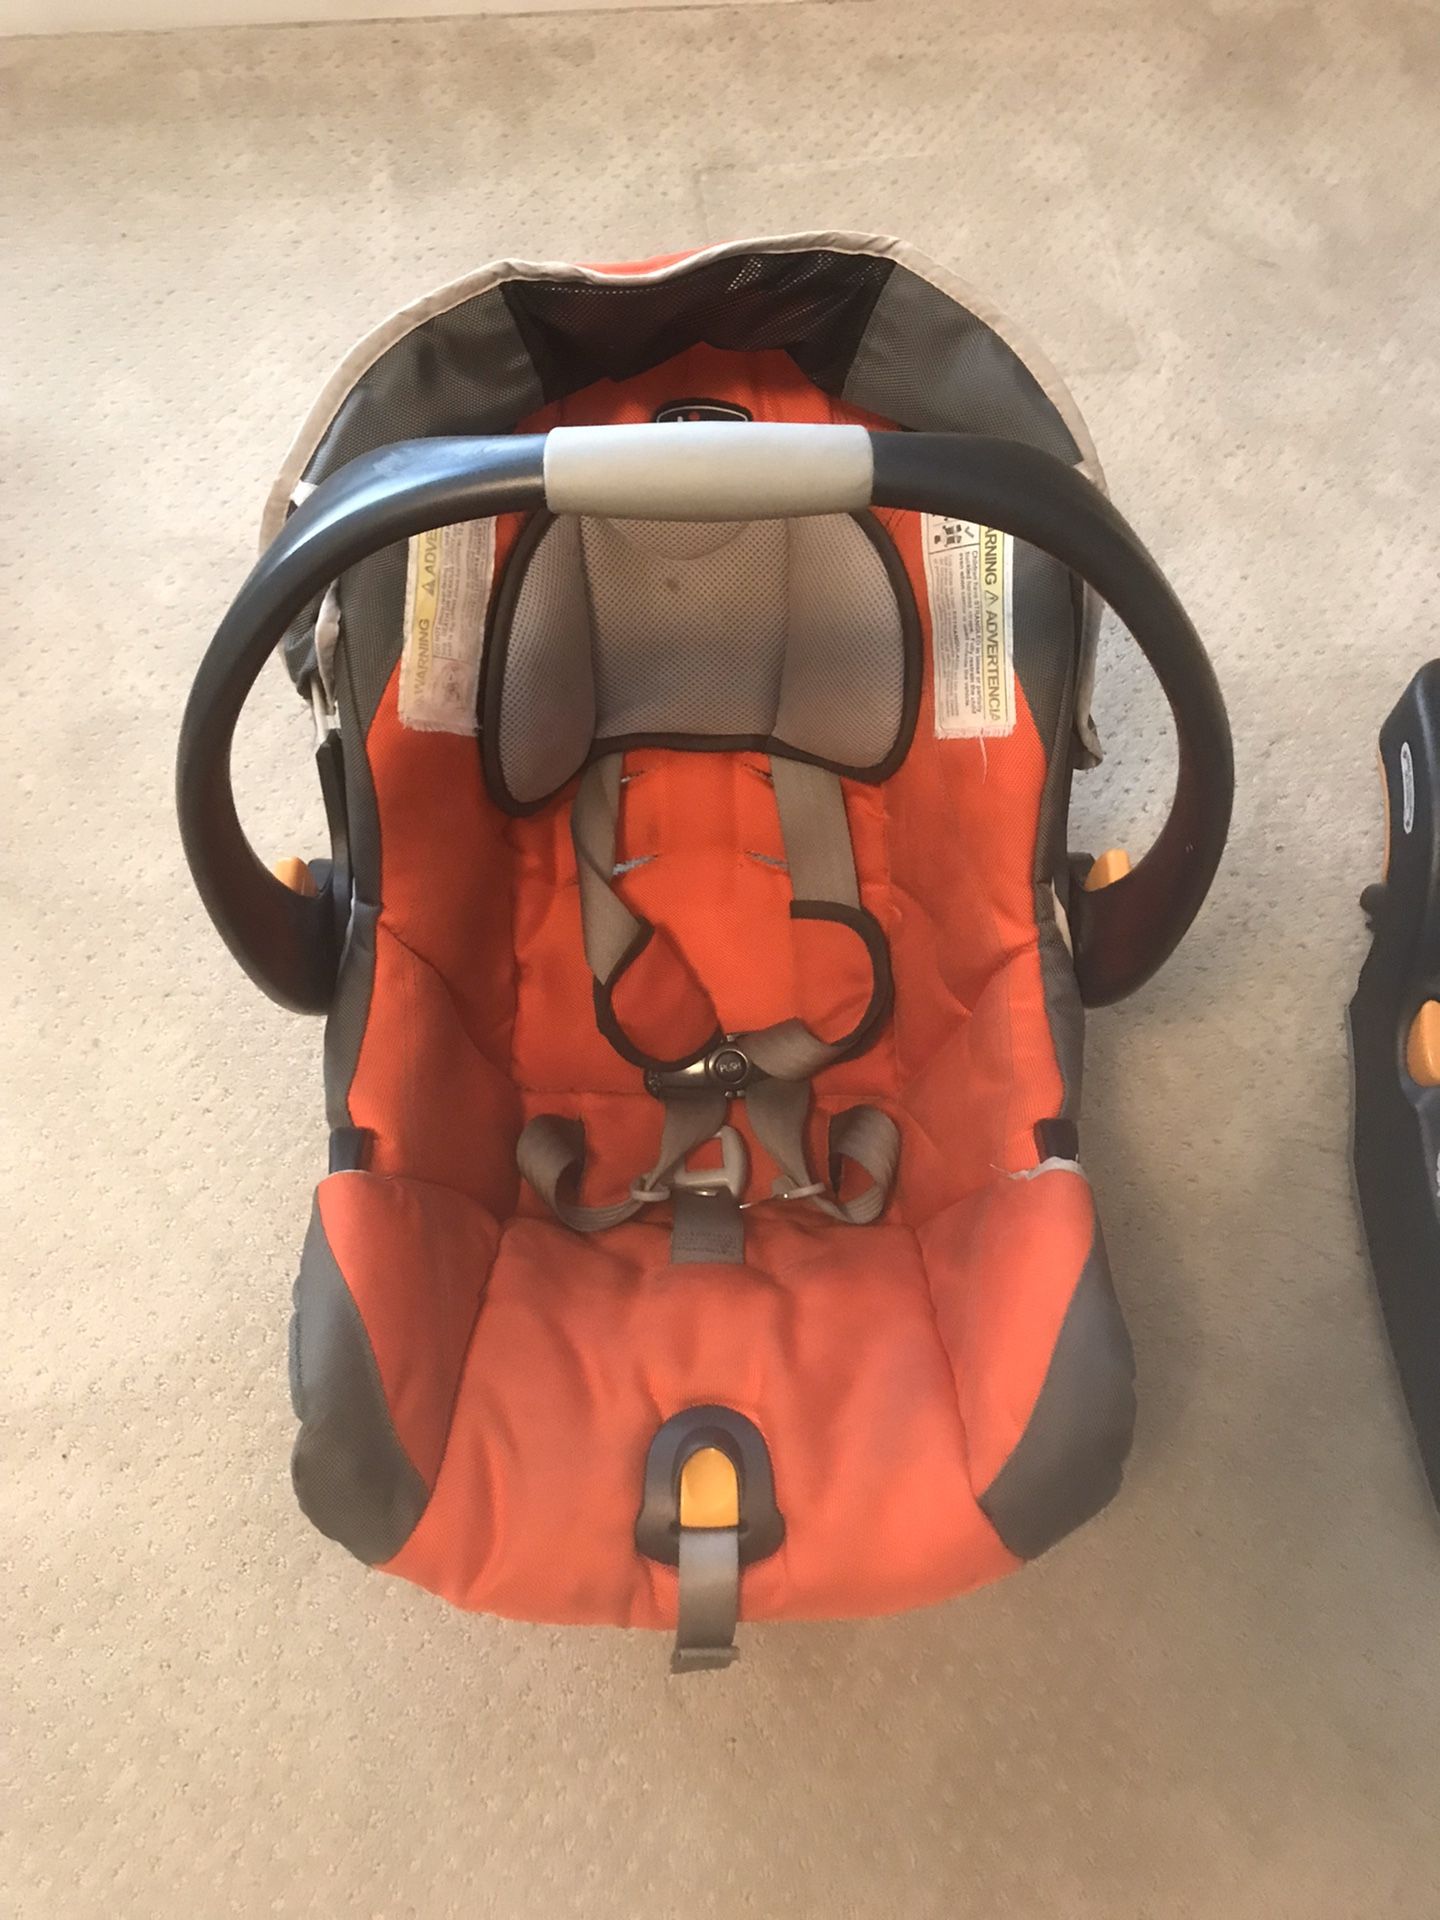 Chico infant car seat and base